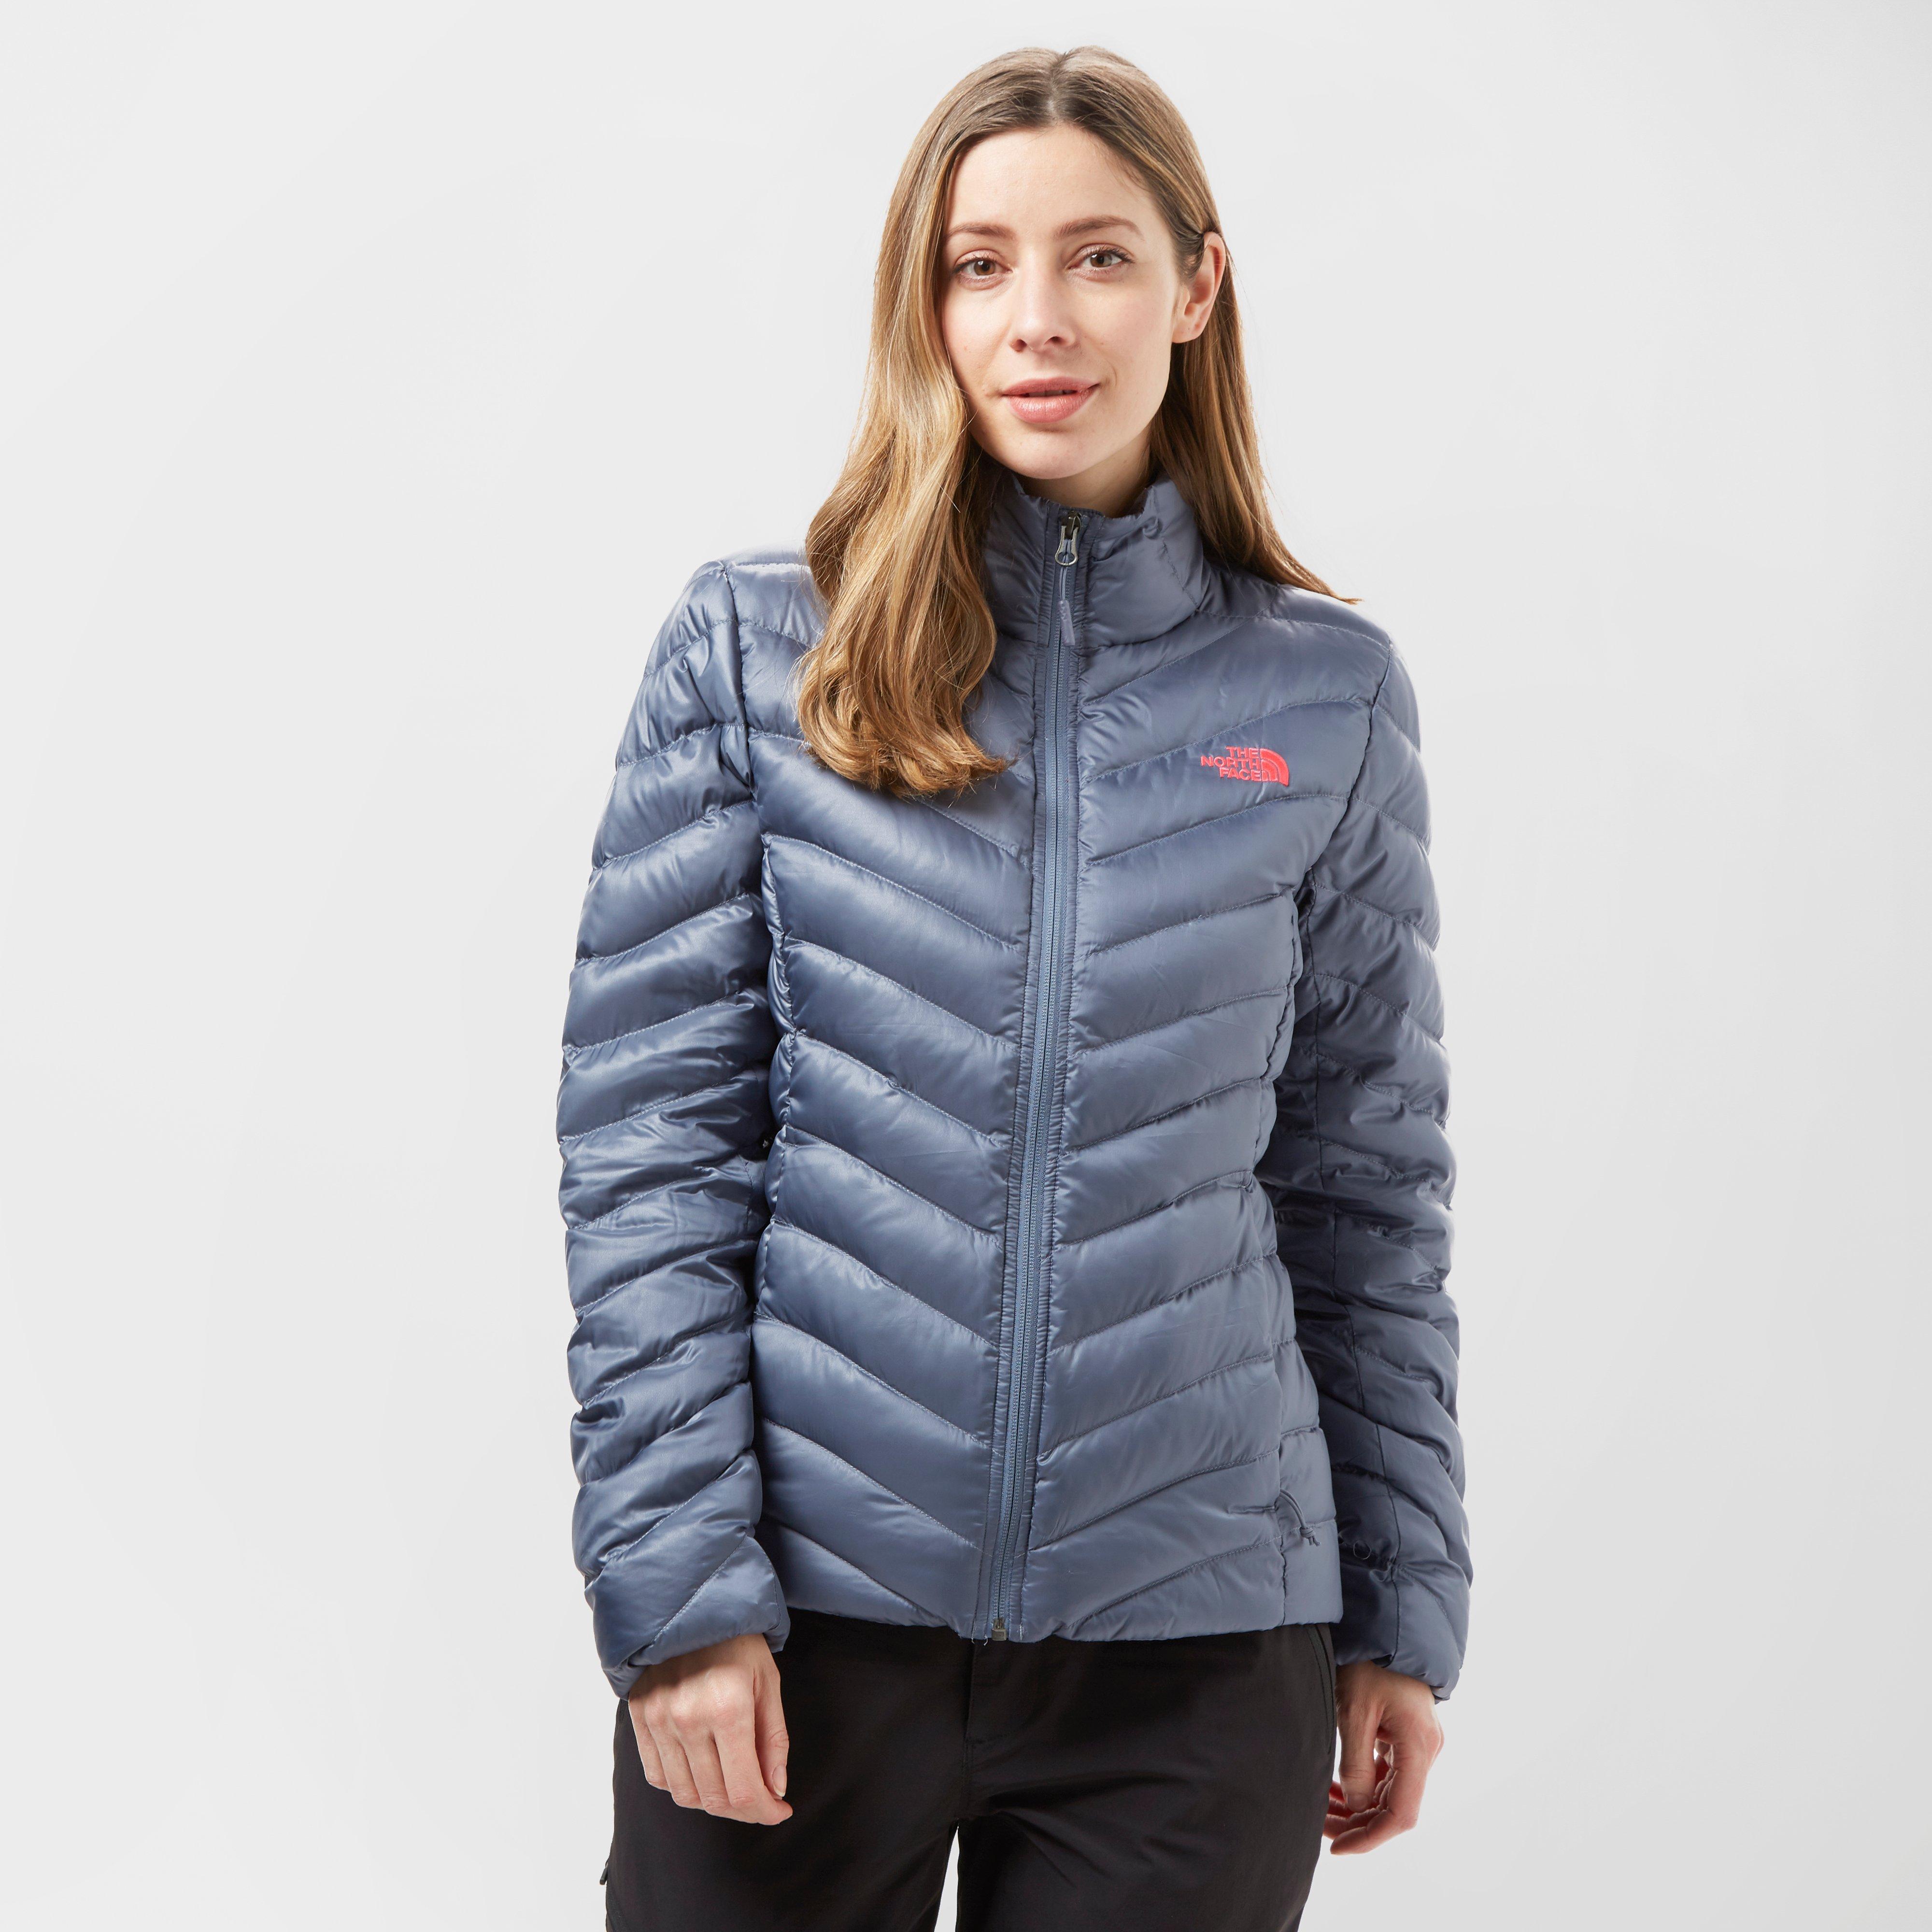 Womens Insulated & Down Jackets | Millets